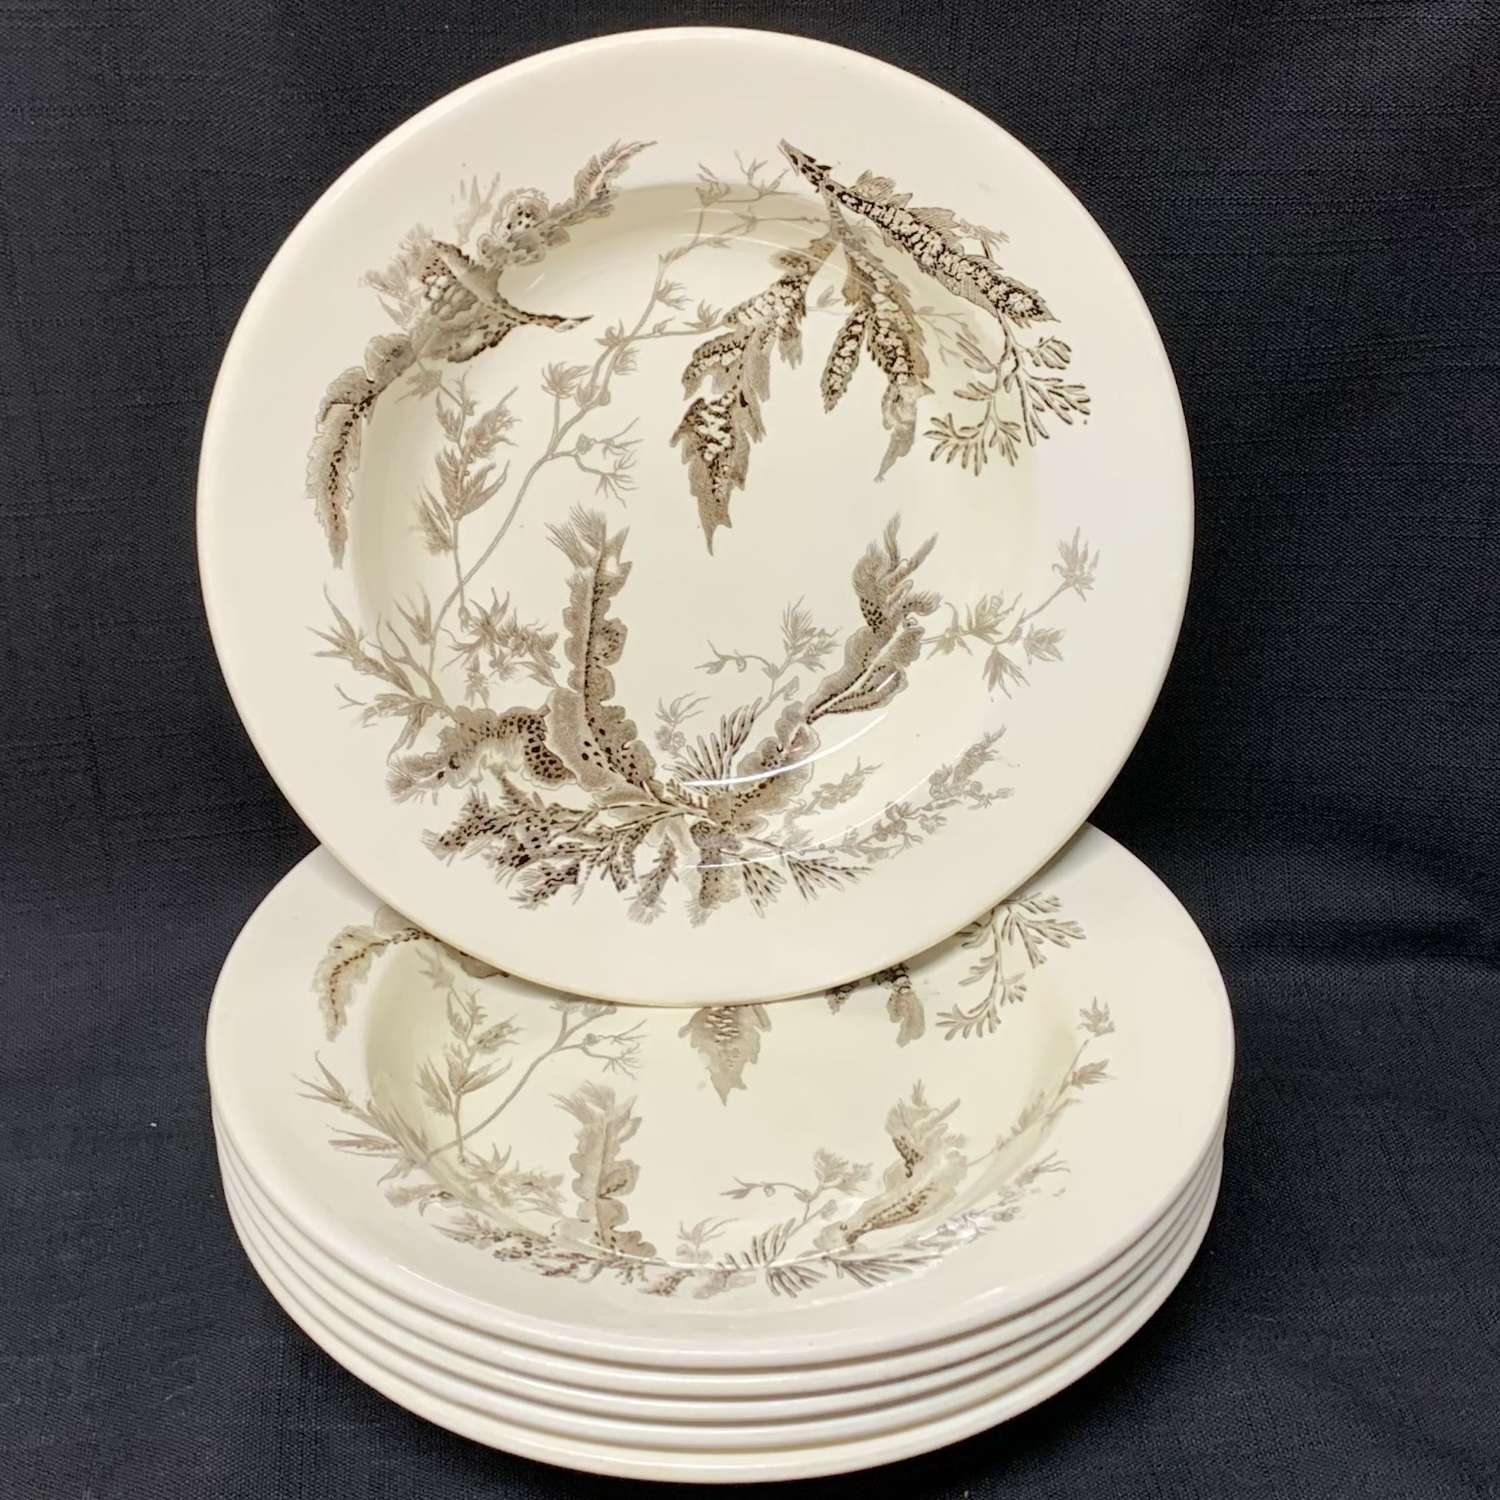 1883 Brown Transfer Printed Wedgwood Bowl Plates  SEAWEED 18 available